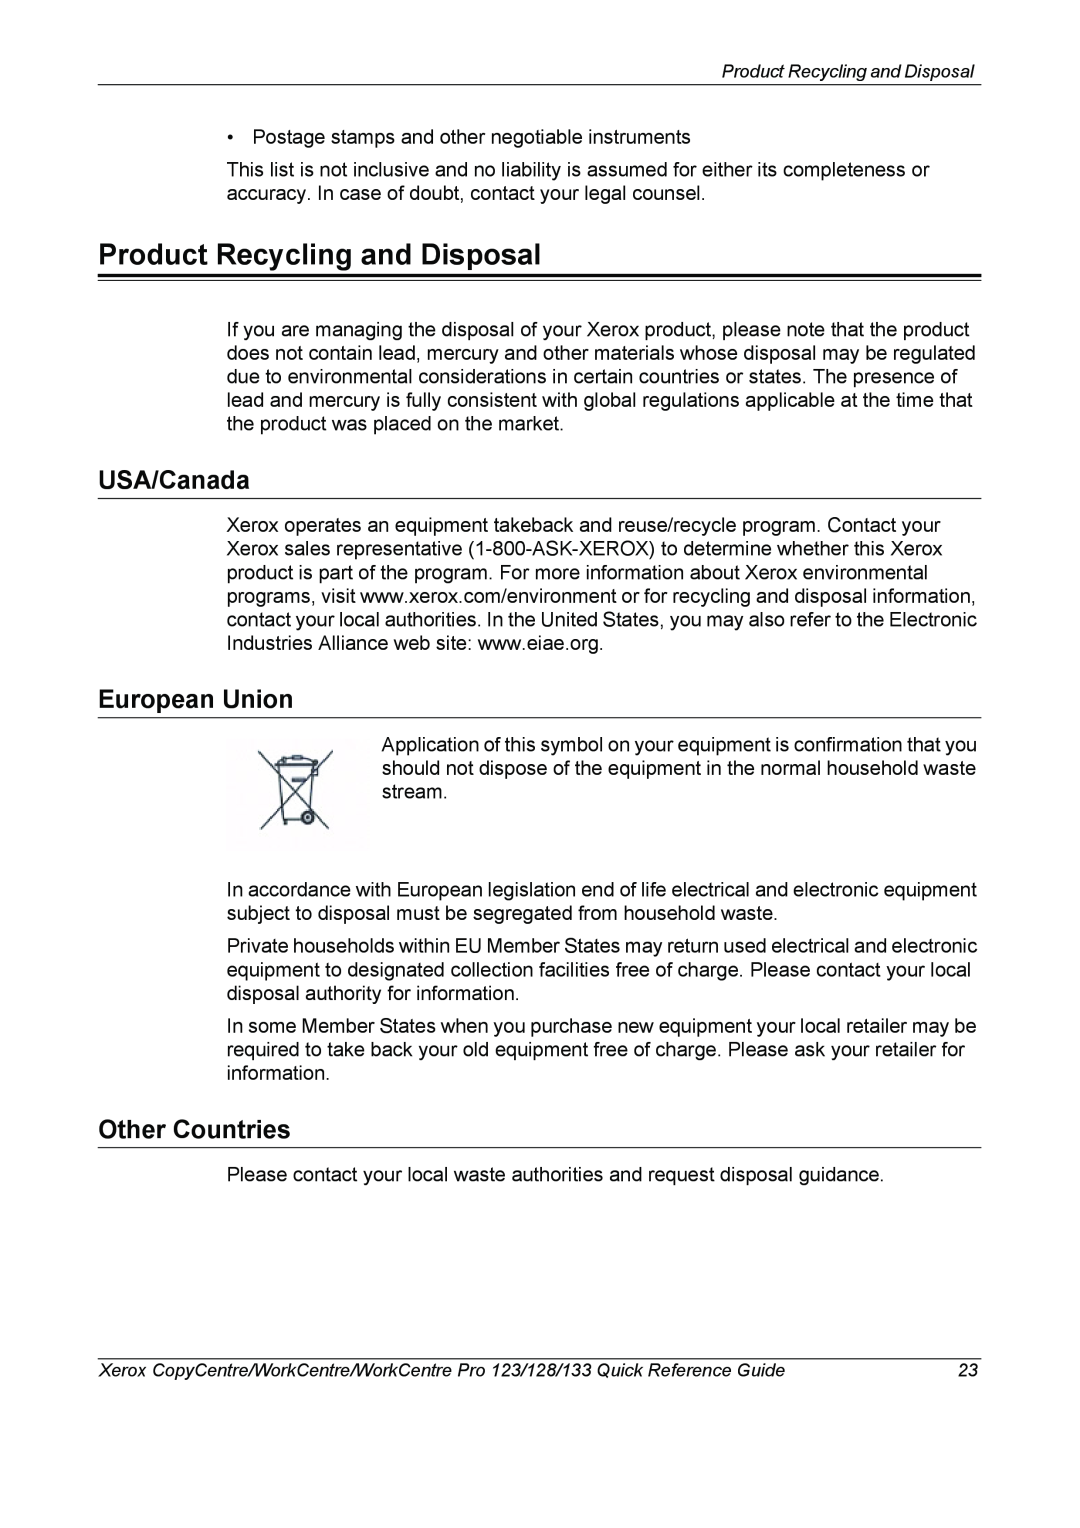 Xerox 604P18037 manual Product Recycling and Disposal, USA/Canada, European Union, Other Countries 